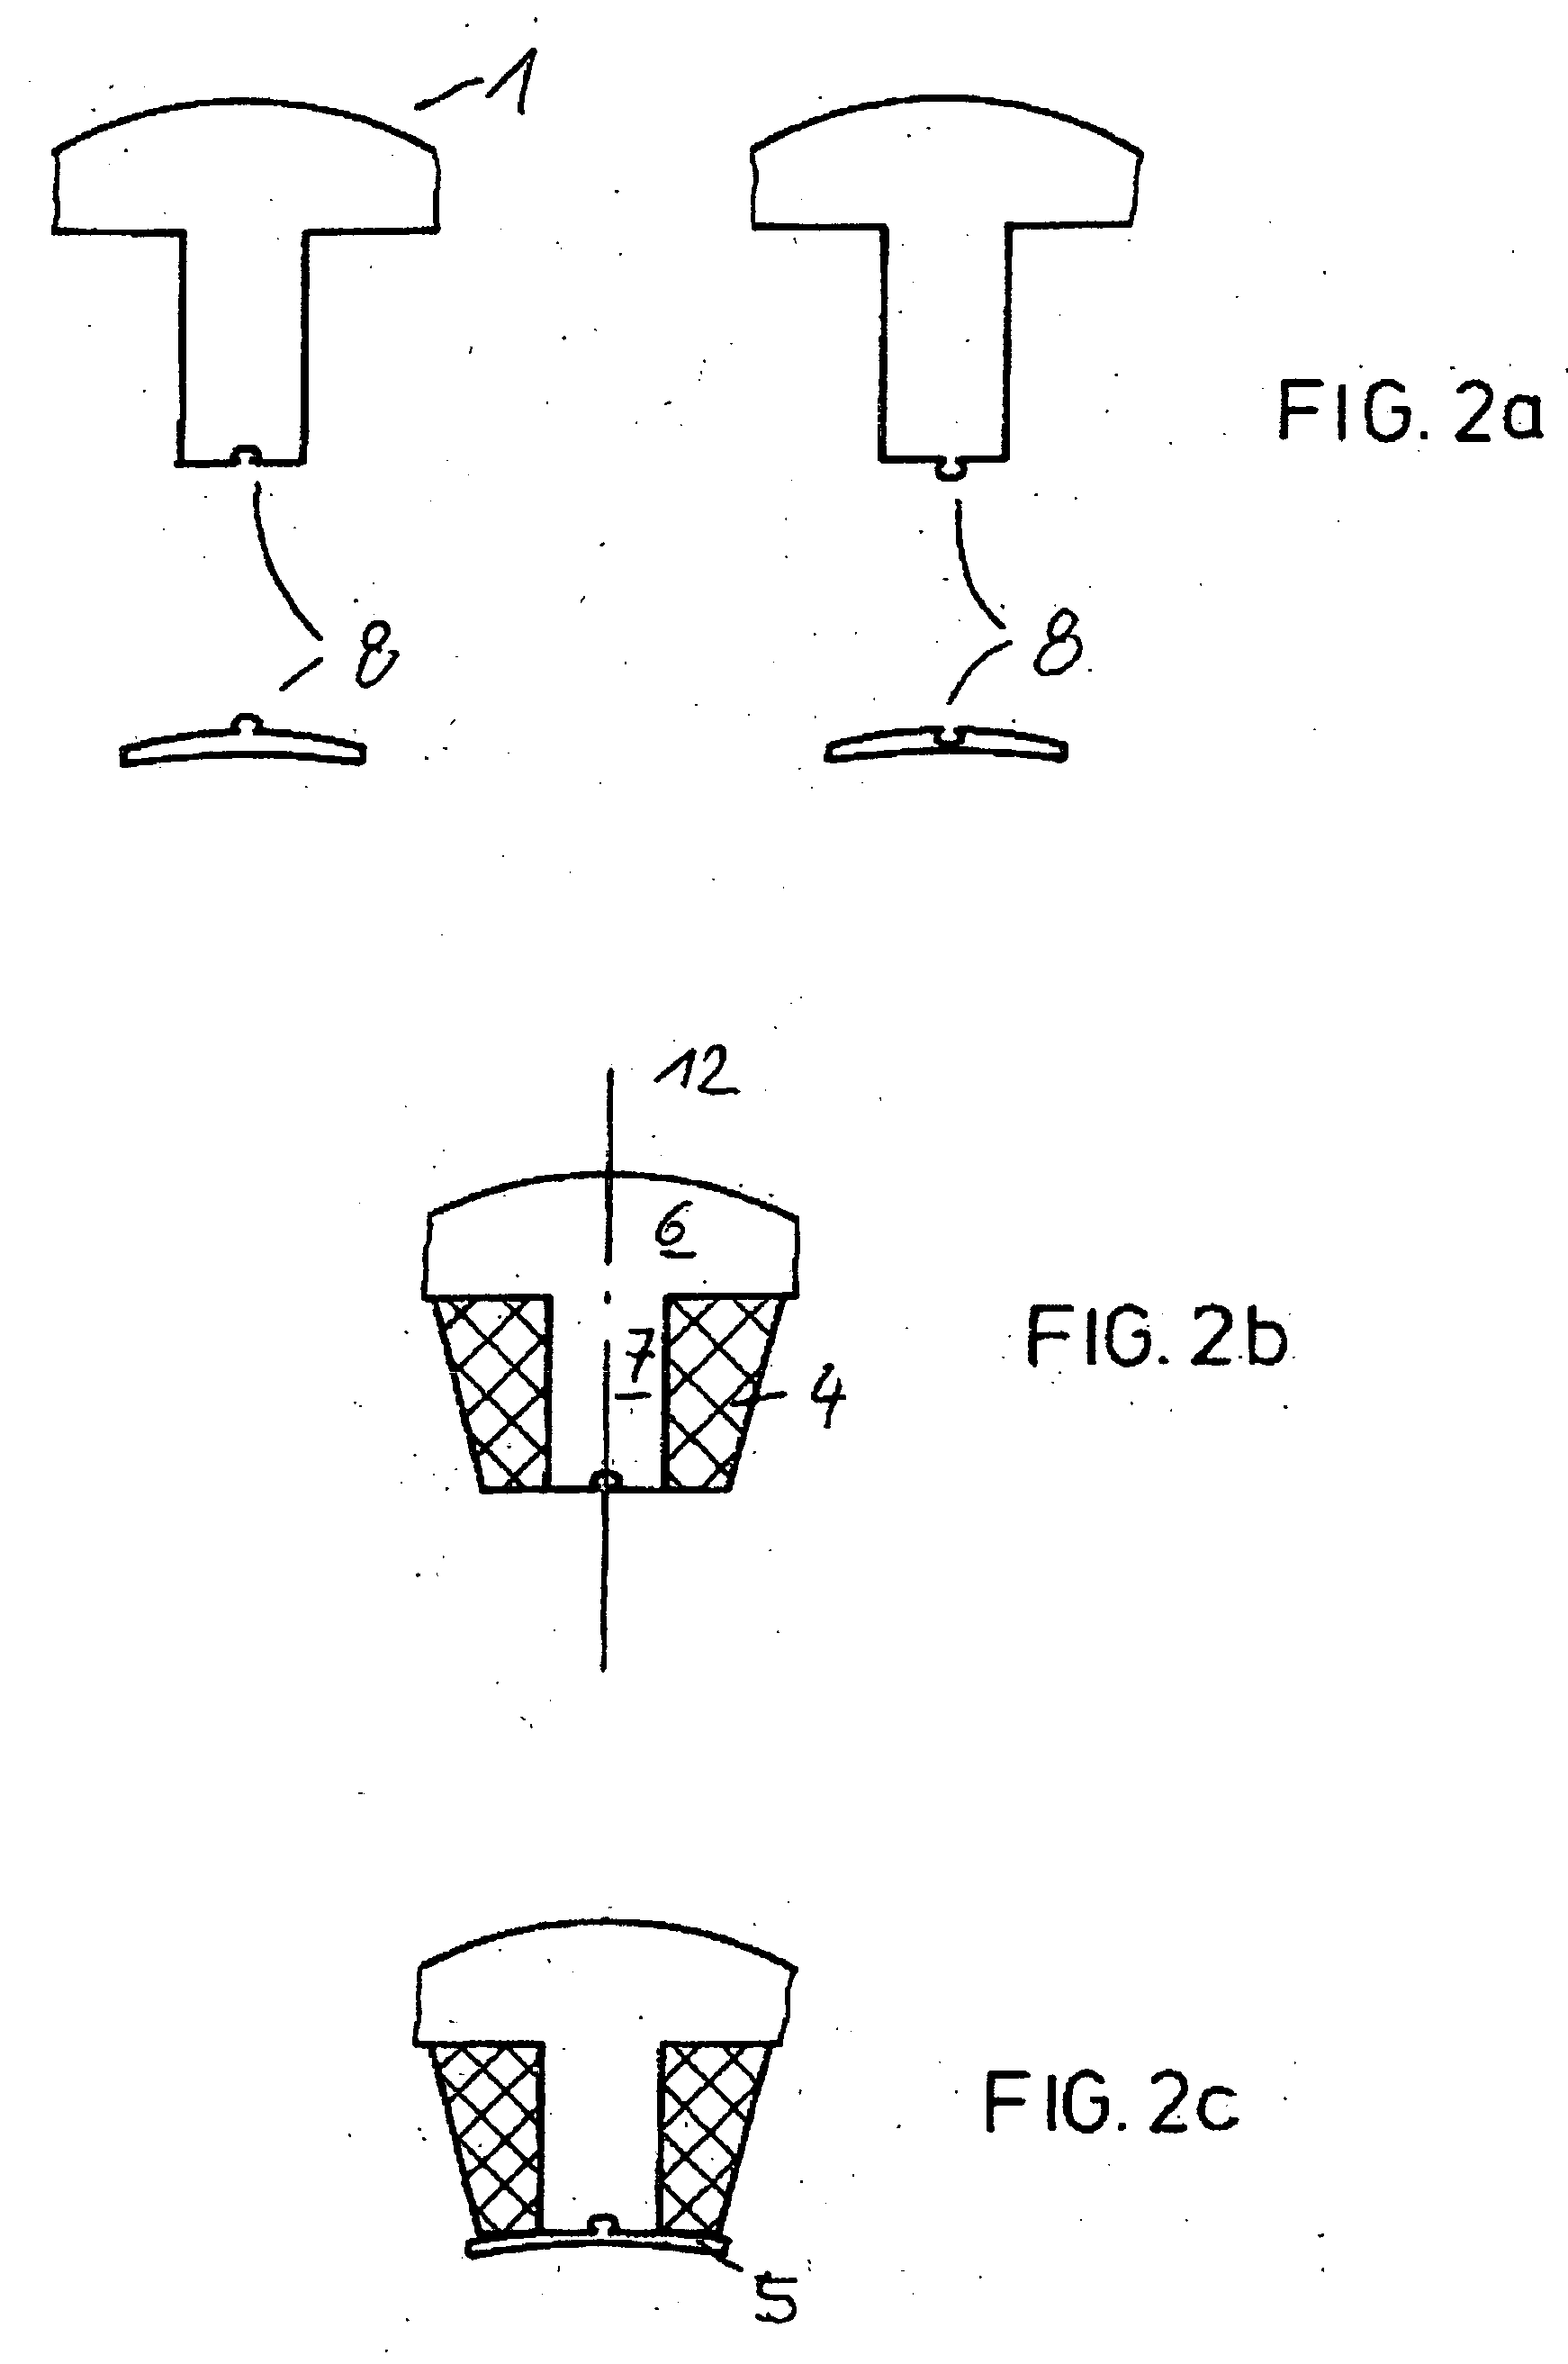 Device and method for manufacturing a stator of an electrical machine